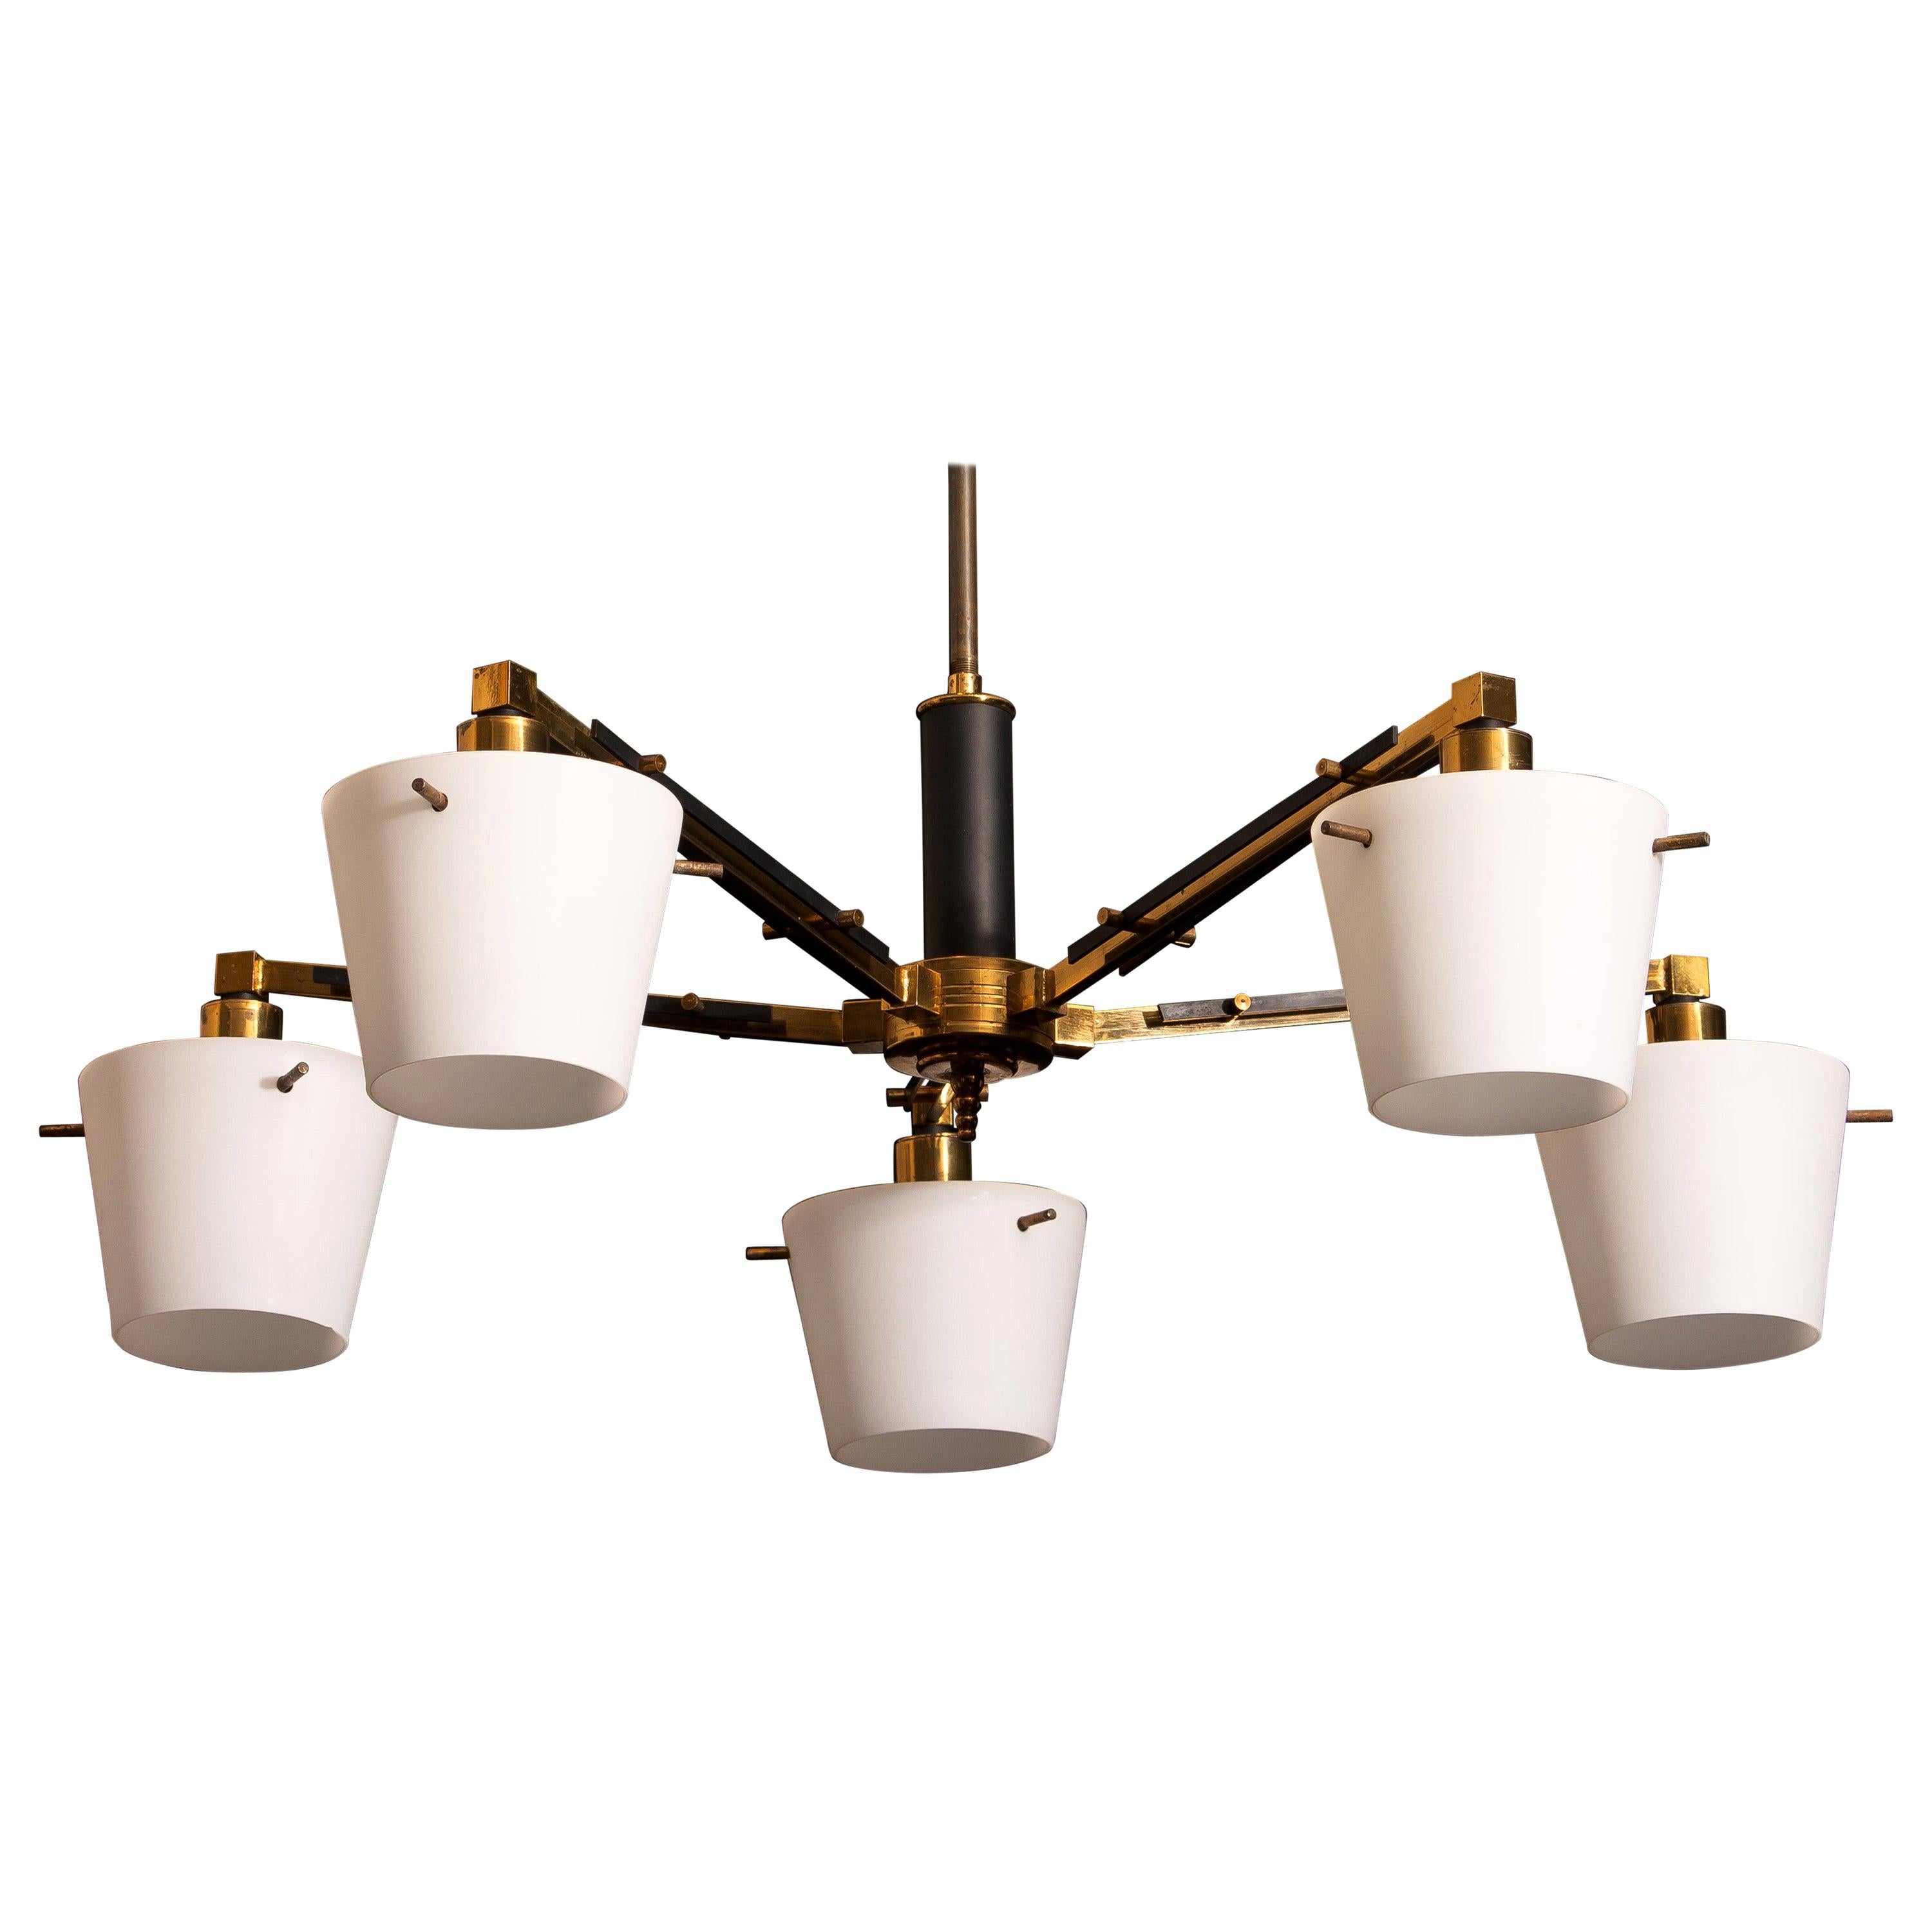 Beautiful and original midcentury chandelier with five frosted white glass shades on a brass frame , Italy. Period: 1950s. Five-light.
Technical 100% / E14 / 17.
The dimensions are Ø of the fixture, 65 cm / 26 inch. Total height 70 cm / 28